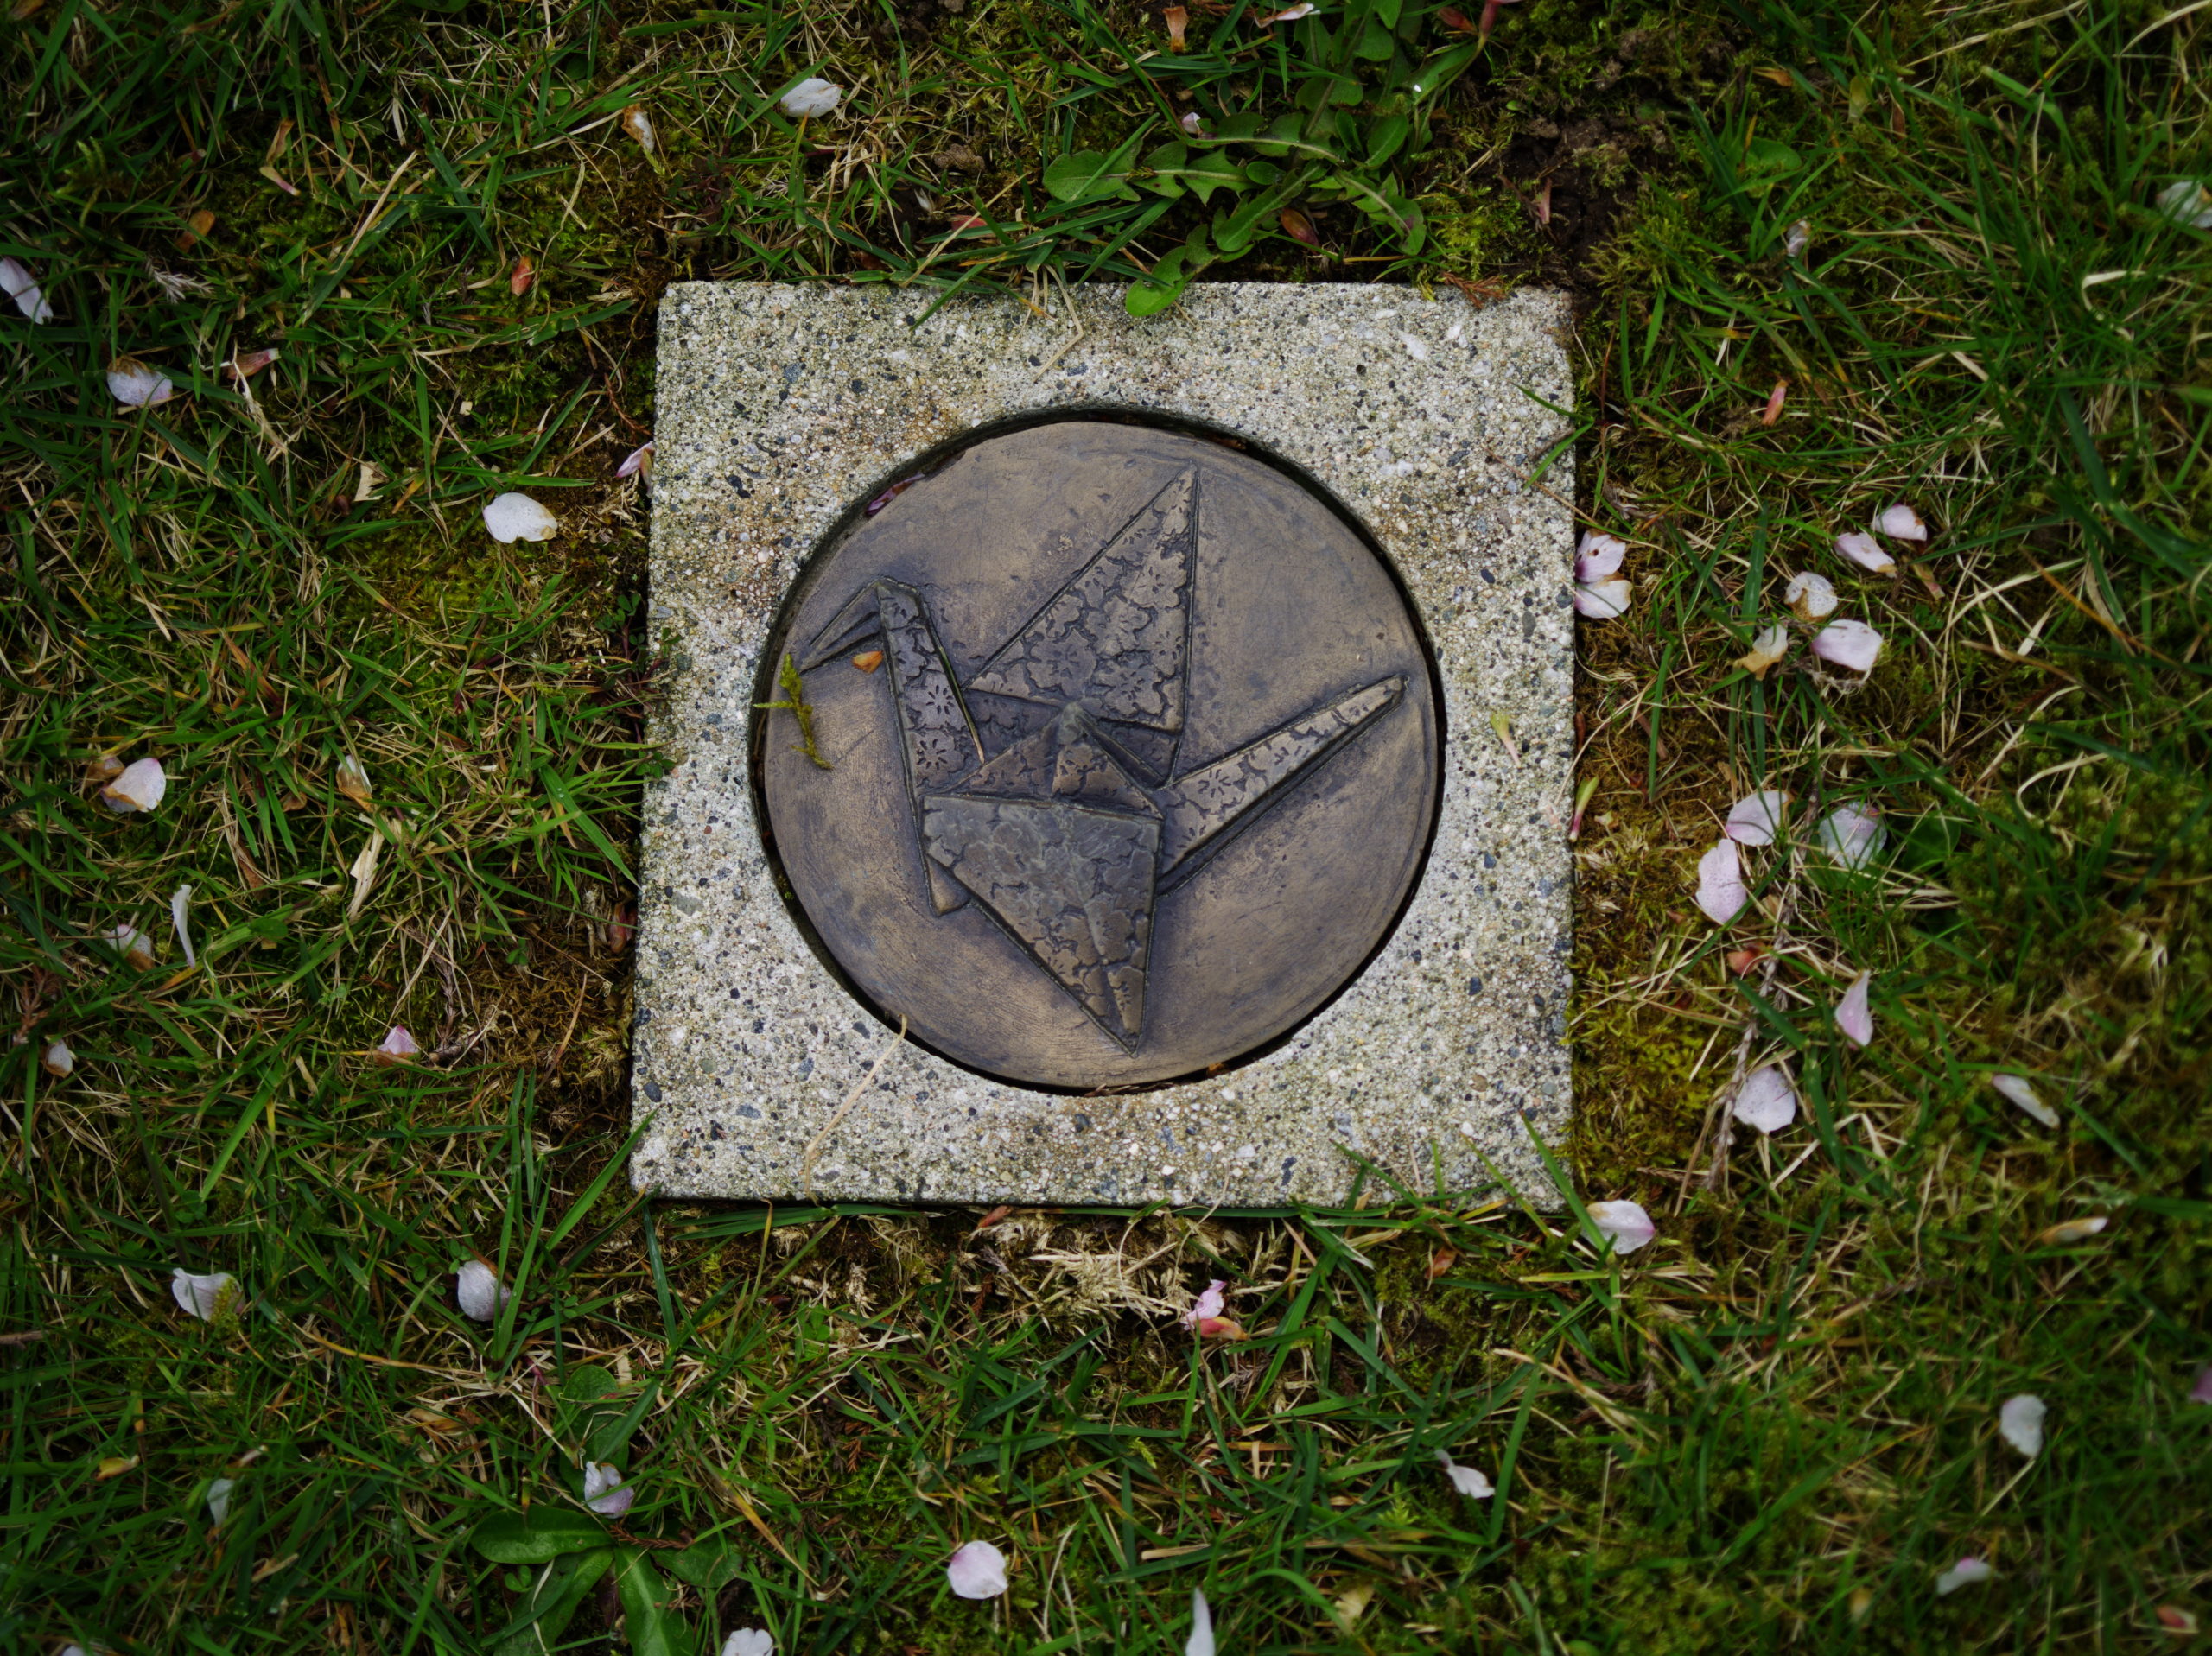 Image Description: A square flat stone frames a round circle featuring an image of an origami crane. There are cherry blossom petals on the grass that surround this small commemorative marker.The crane is designed with many small cherry blossoms patterned over its body.